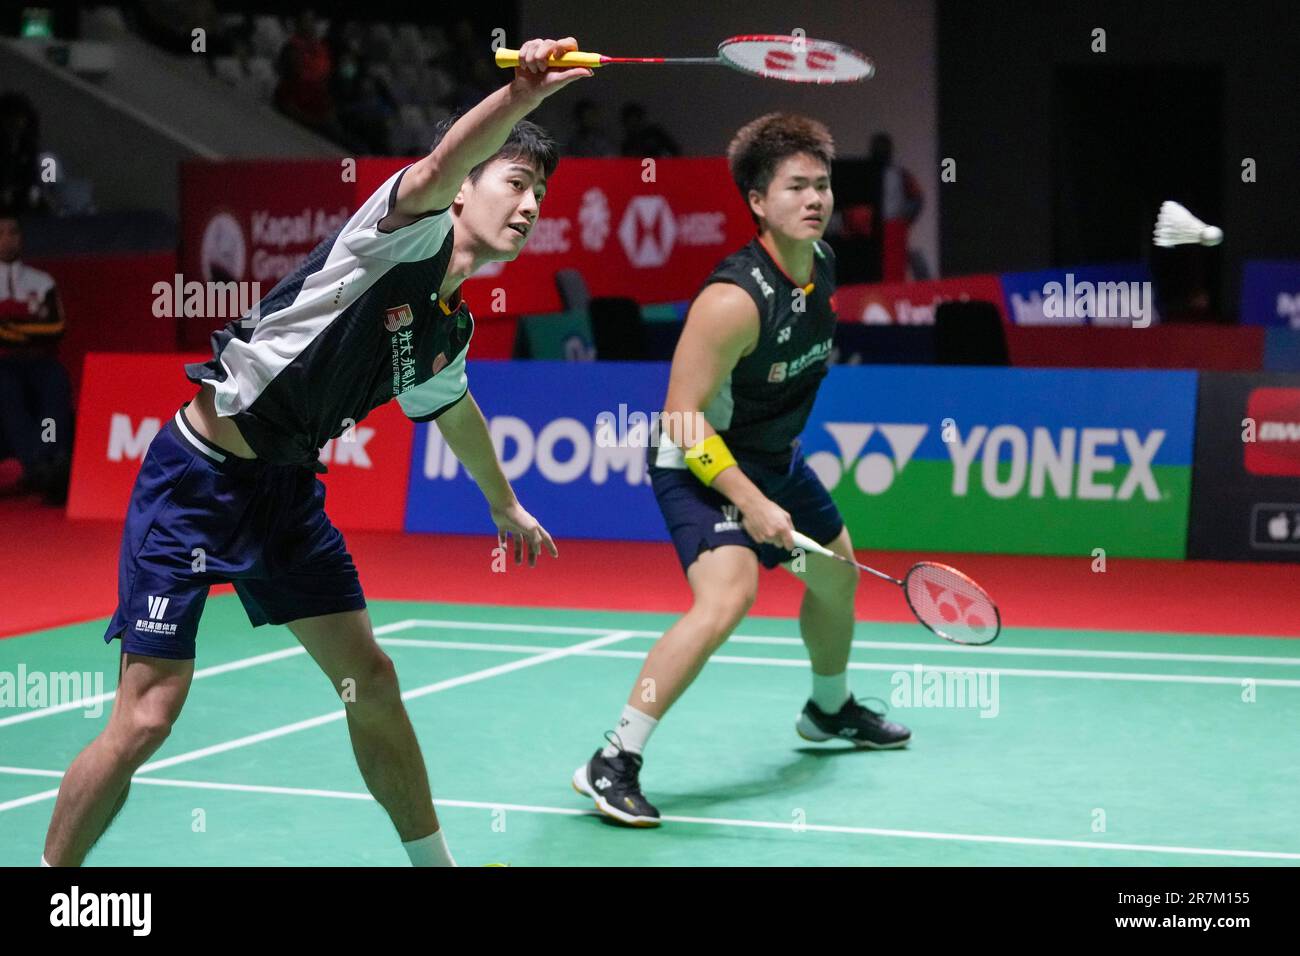 Chinas Wang Chang, left, with Liang Wei Keng play against Indonesias Pramudya Kusumawardana and Yeremia Rambitan during their mens dobles quarter final match at Indonesia Open badminton tournament at Istora Stadium in